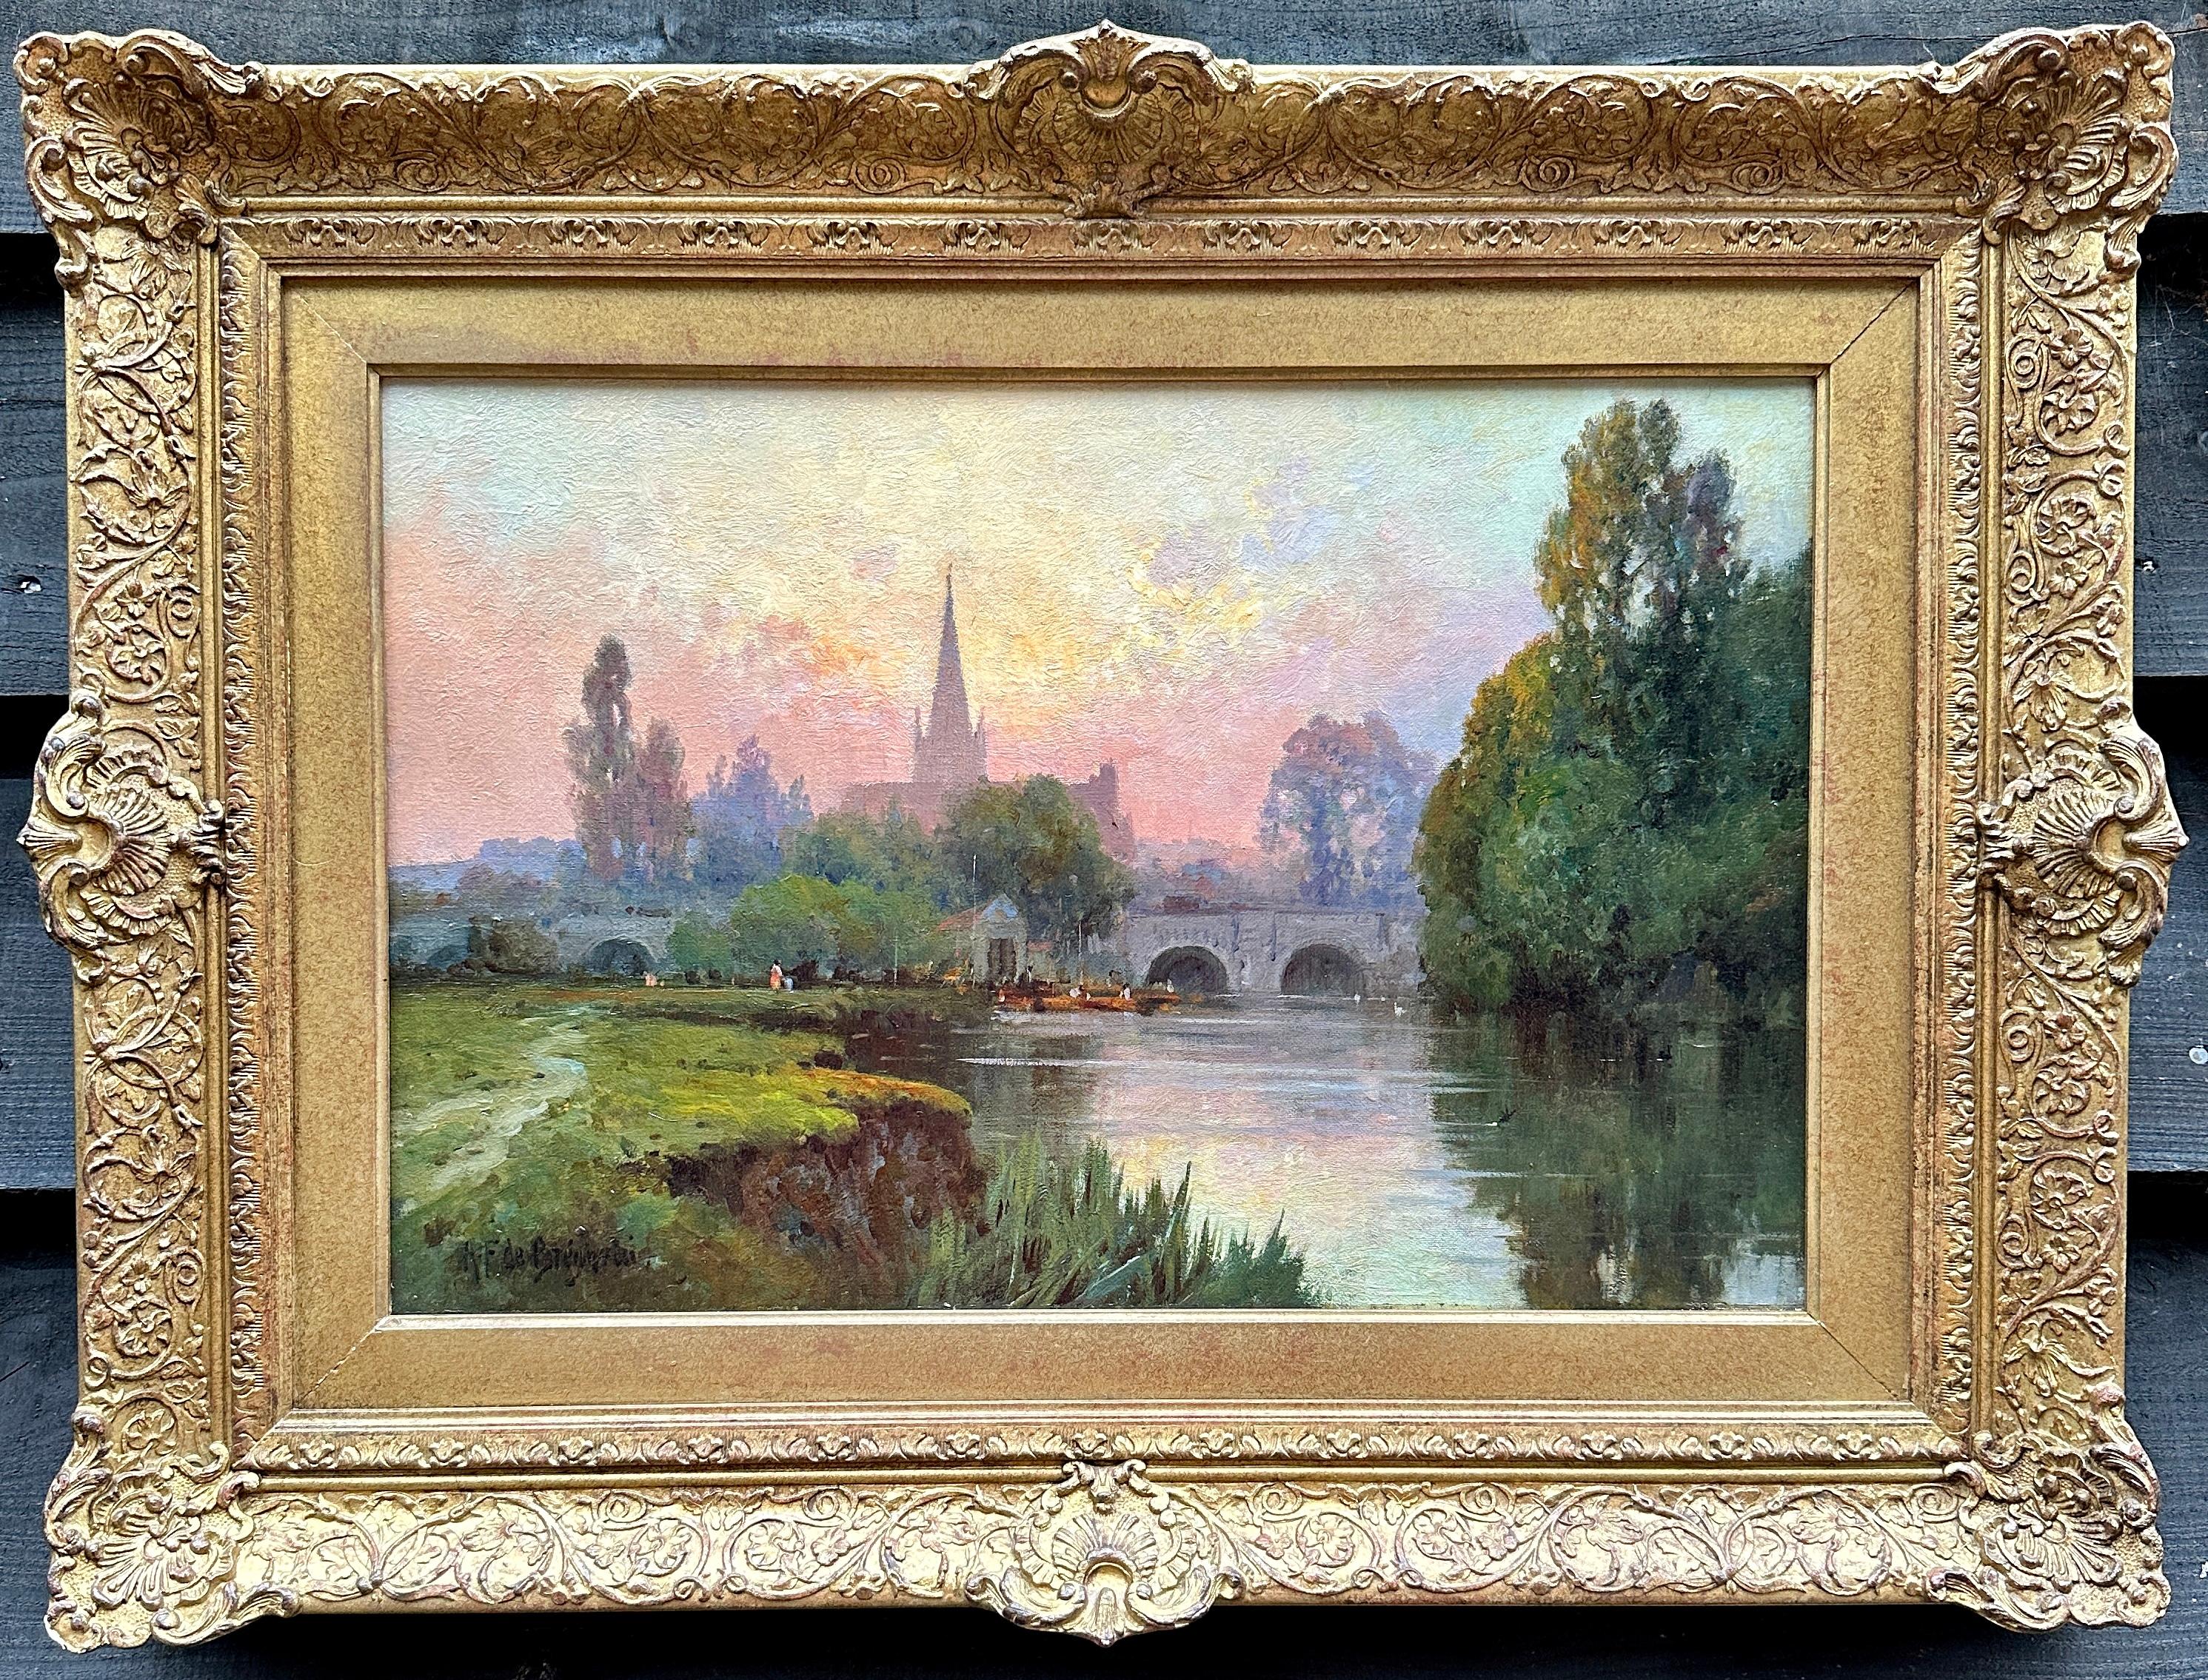 Alfred de Breanski Jnr. Figurative Painting - English River landscape, with Church and River at Sunset, Abingdon on the Thames